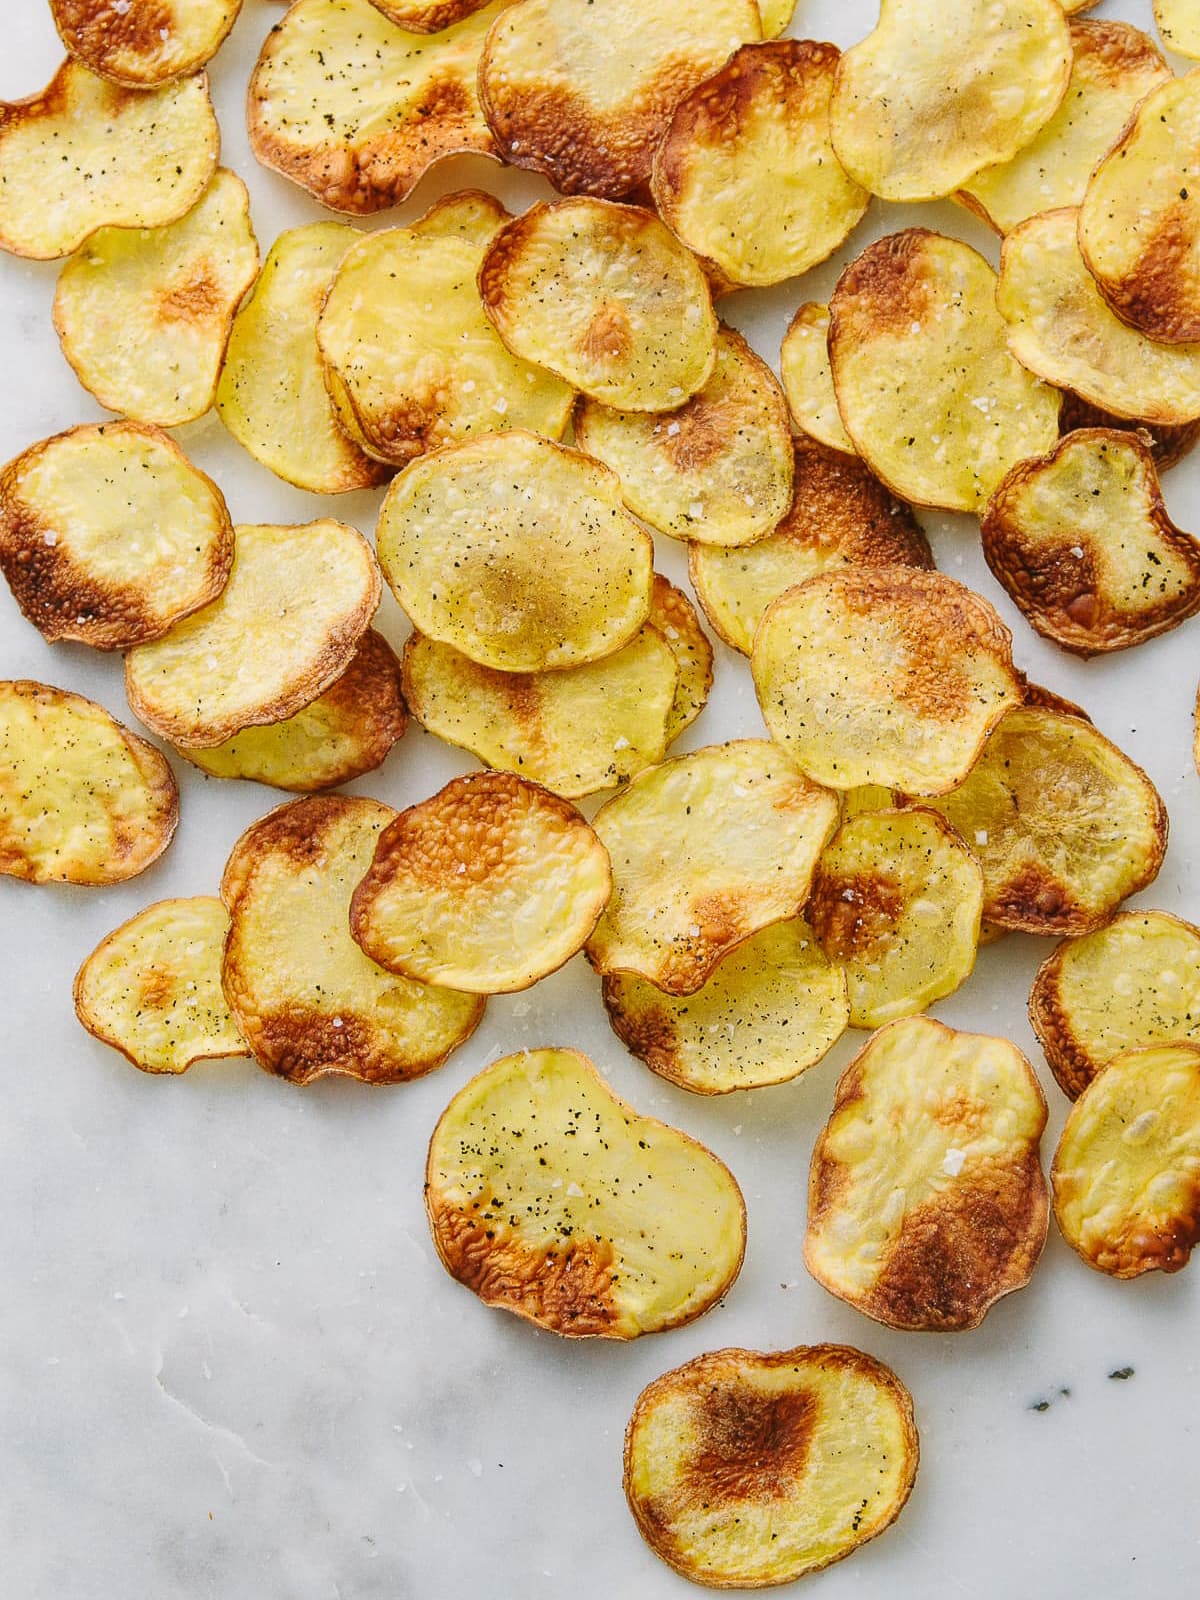 Pictures Of Potatoes Chips